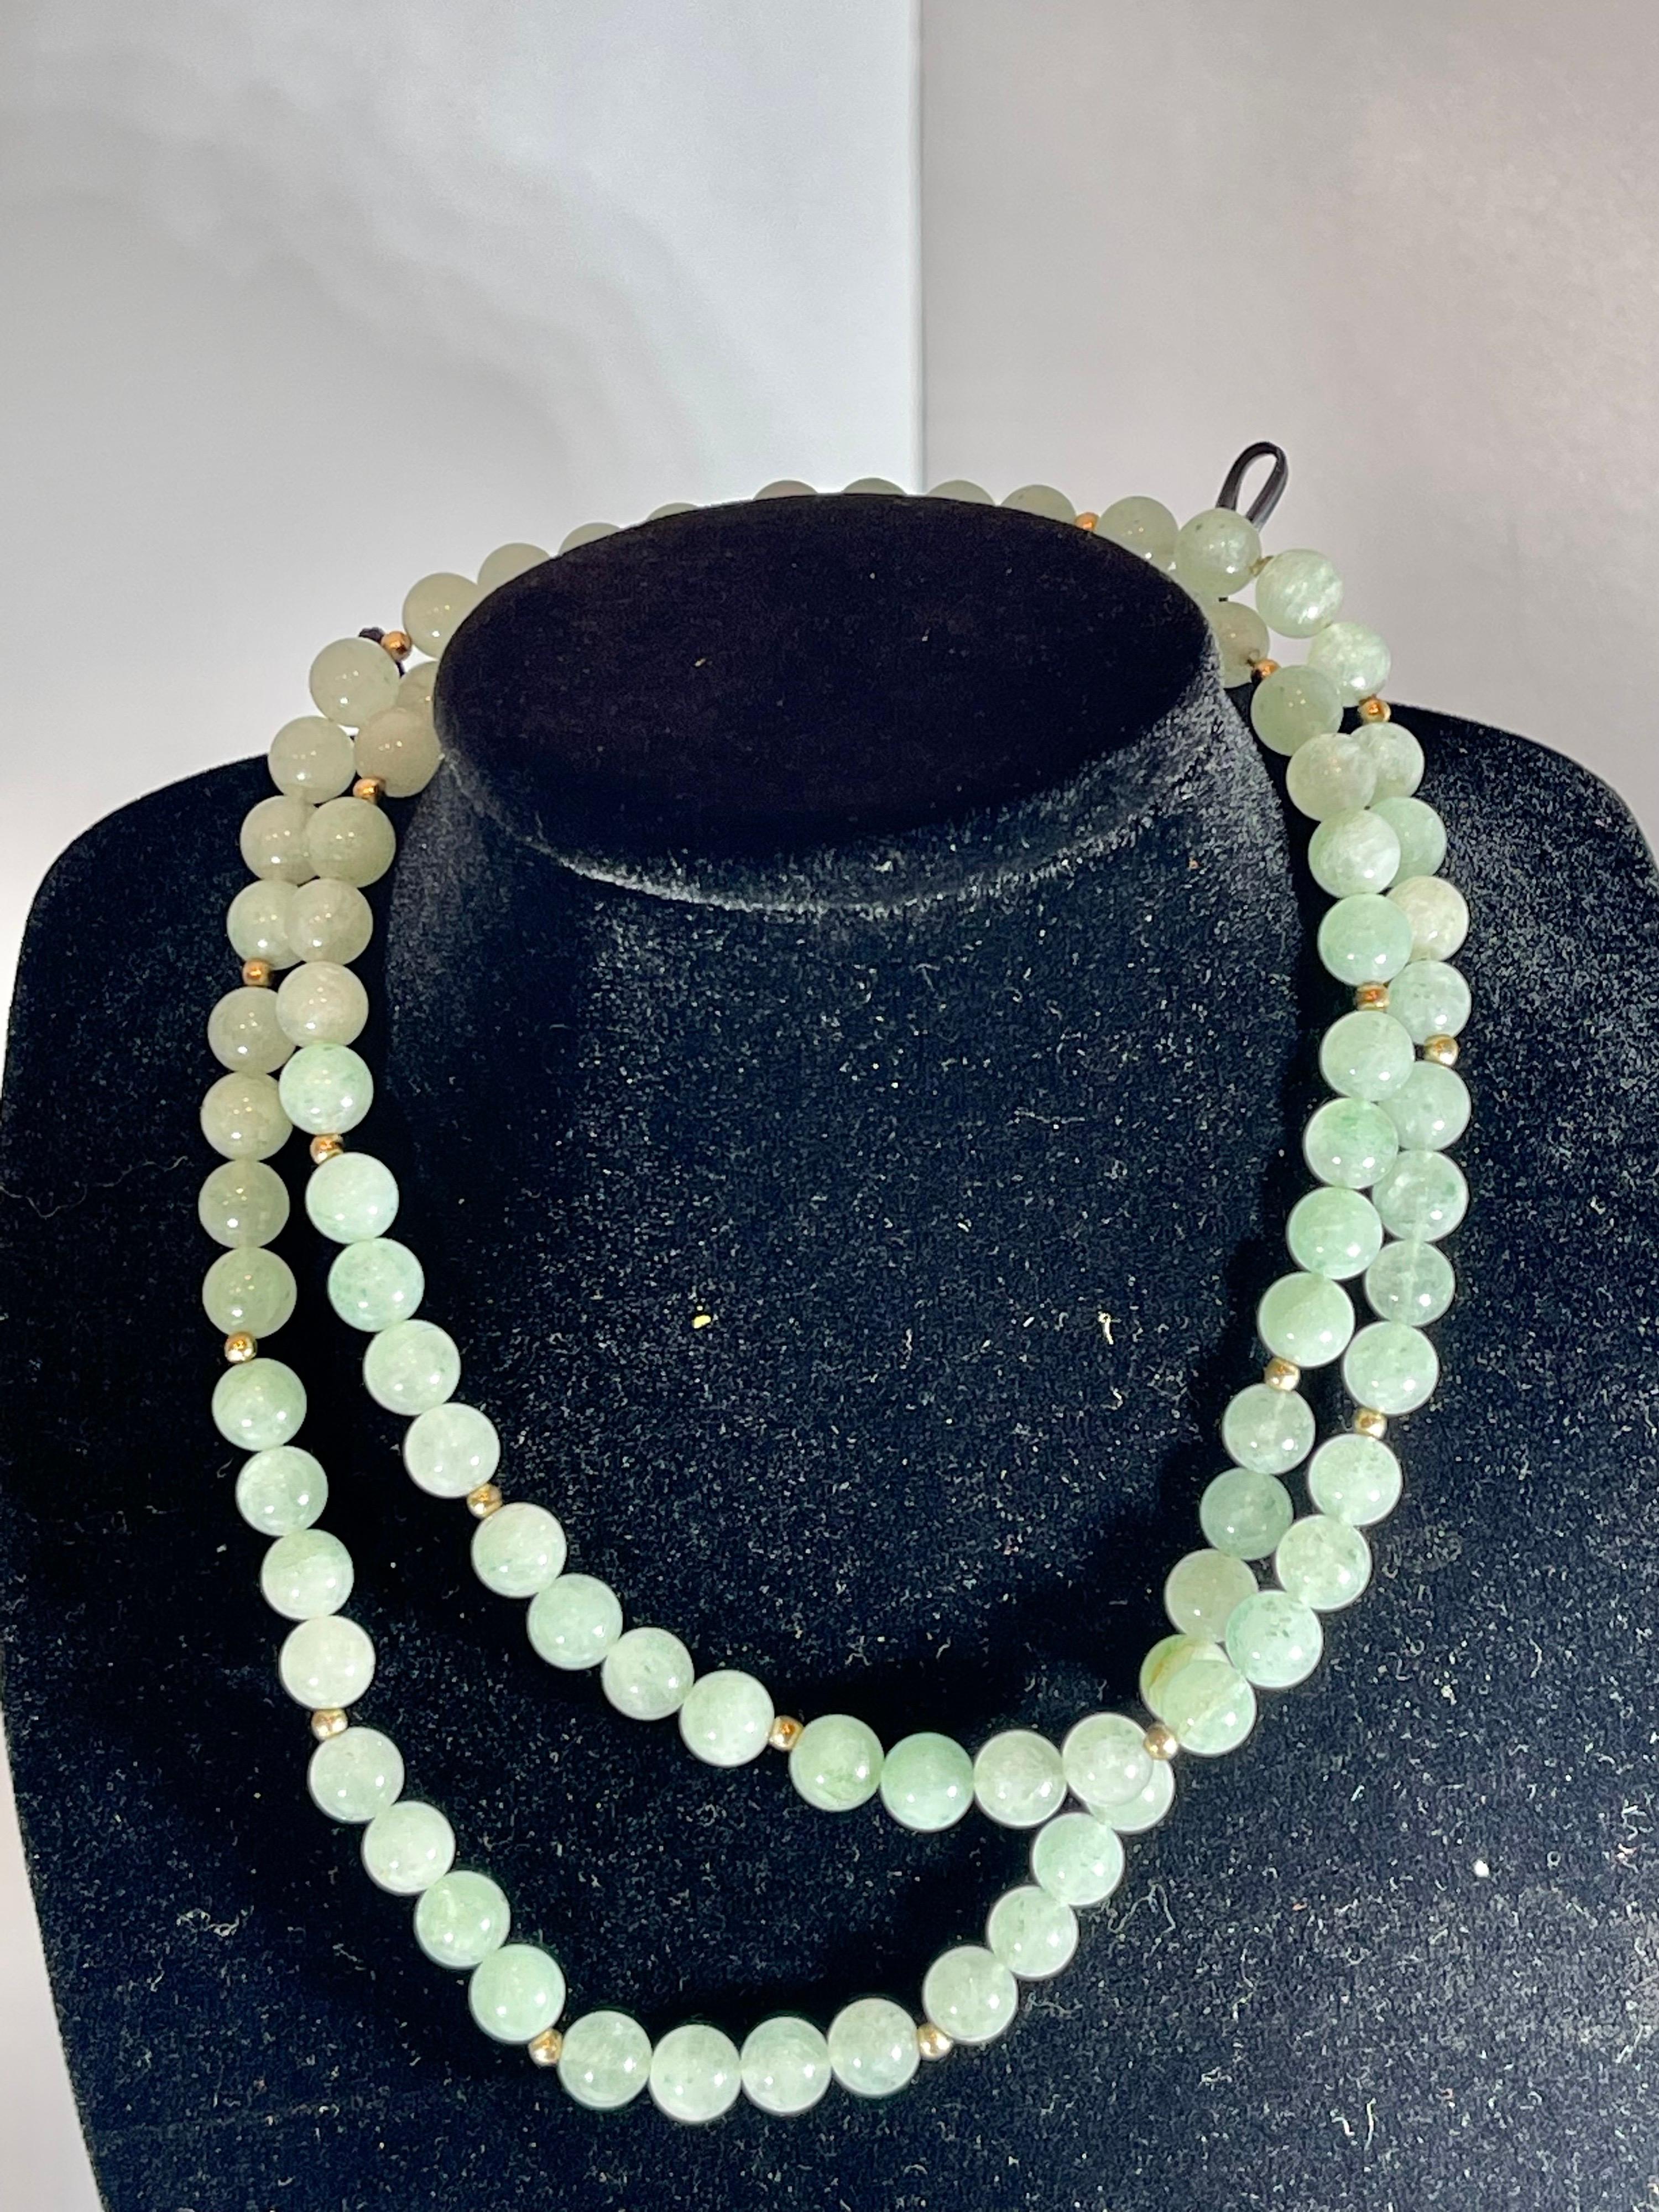 Grade A+ Green Quartz Crystal Bead Necklace 8.5 mm With 14 K Gold Beads, Genuine For Sale 3